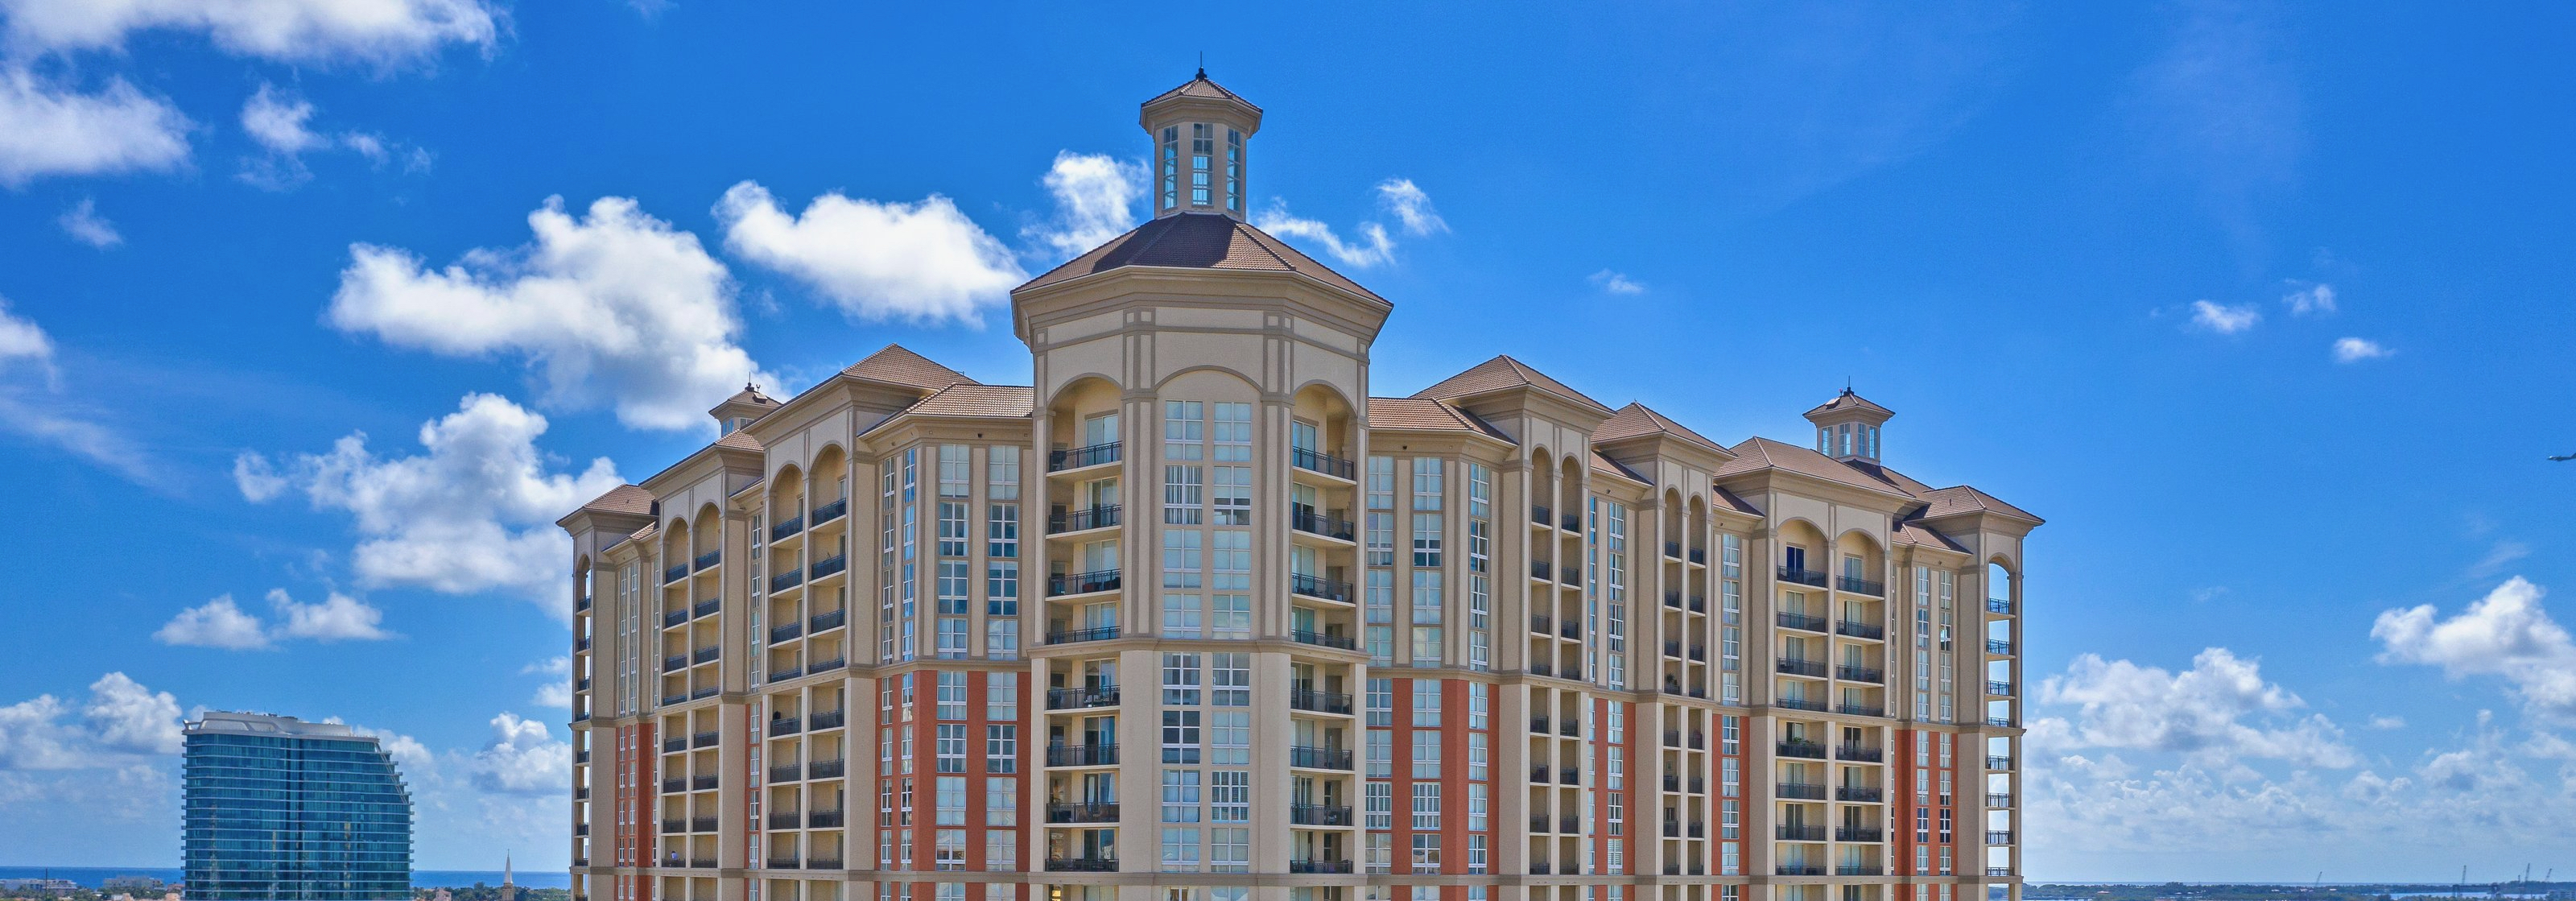 Cityplace South Tower Condos For Sale | 550 Okeechobee Blvd, West Palm Beach, FL 33401